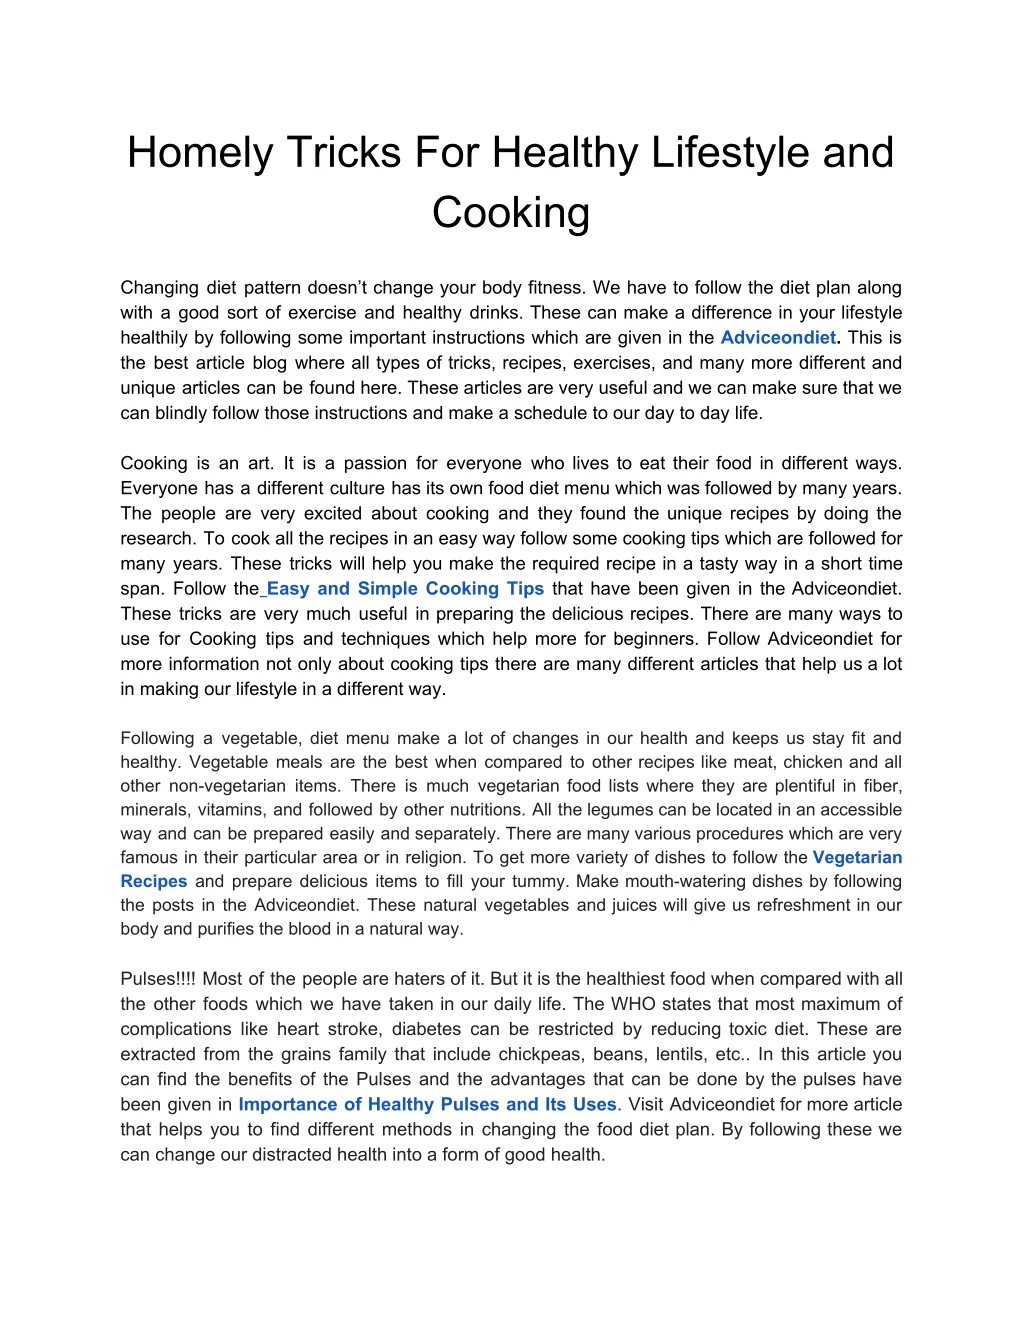 homely tricks for healthy lifestyle and cooking